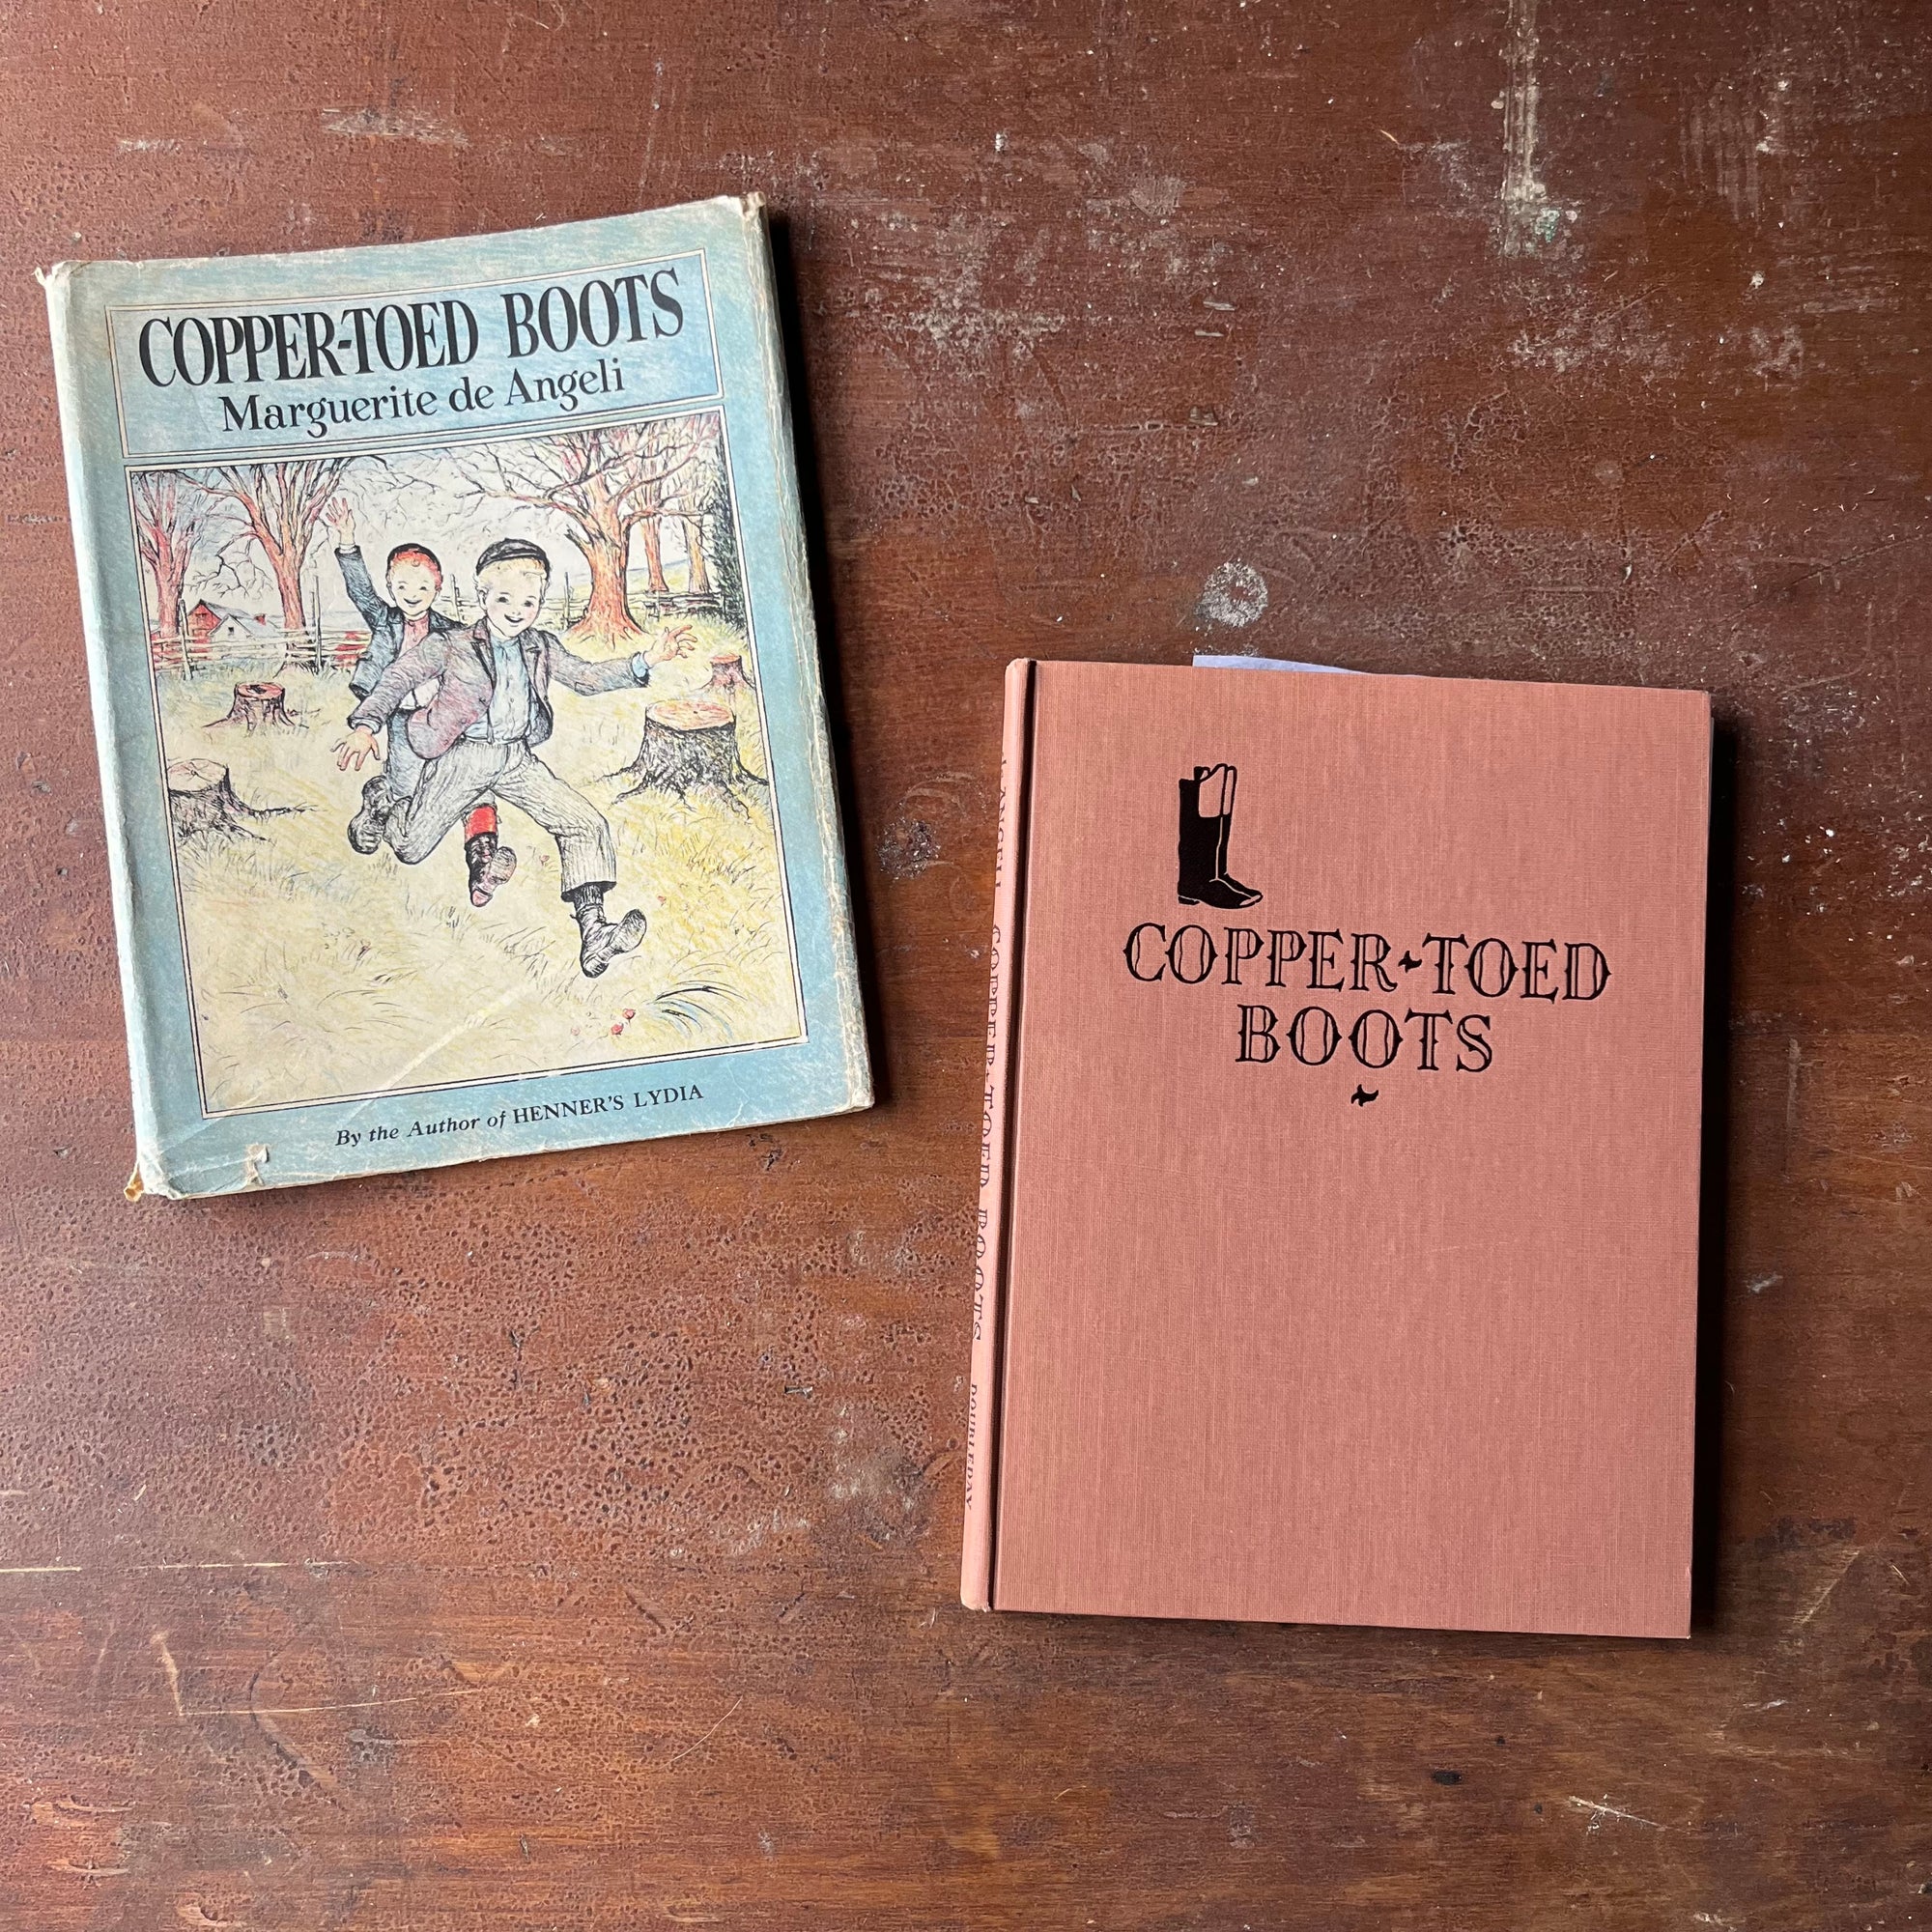 Copper-Toed Boots written & Illustrated by Marguerite de Angeli-1938 Edition with Dust Jacket-Autographed Edition-vintage picture book-view of the front cover with an embossed title and dust jacket off to the side